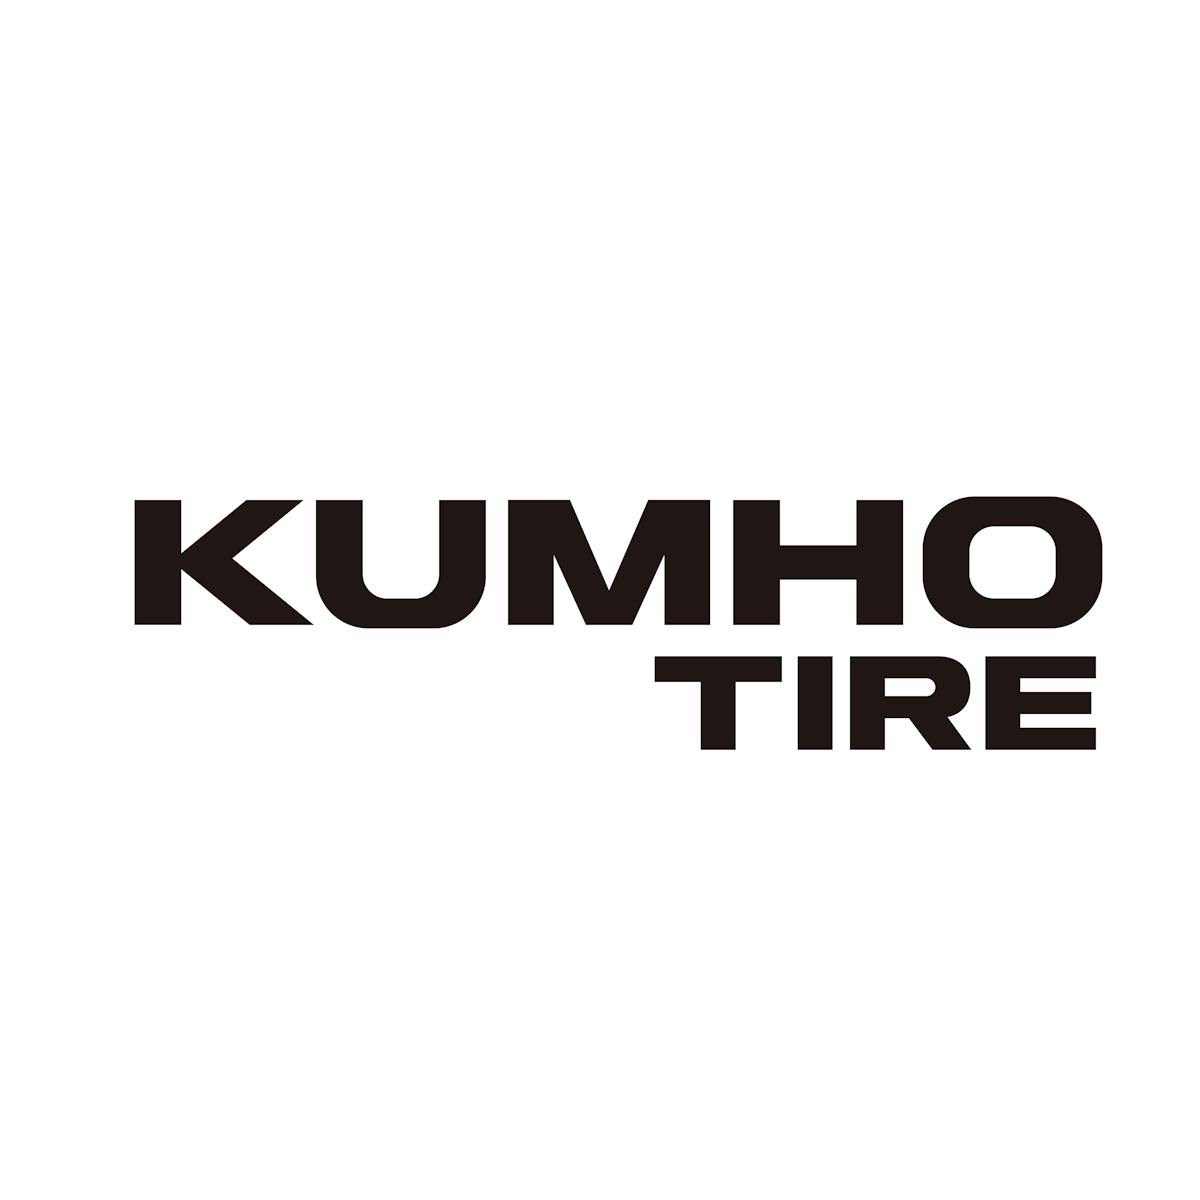 &apos;At Kumho Tire, we believe in providing high-quality tires for discerning consumers who demand a great value.&rdquo; says Shawn Denlein, president of sales and marketing for Kumho Tire USA.